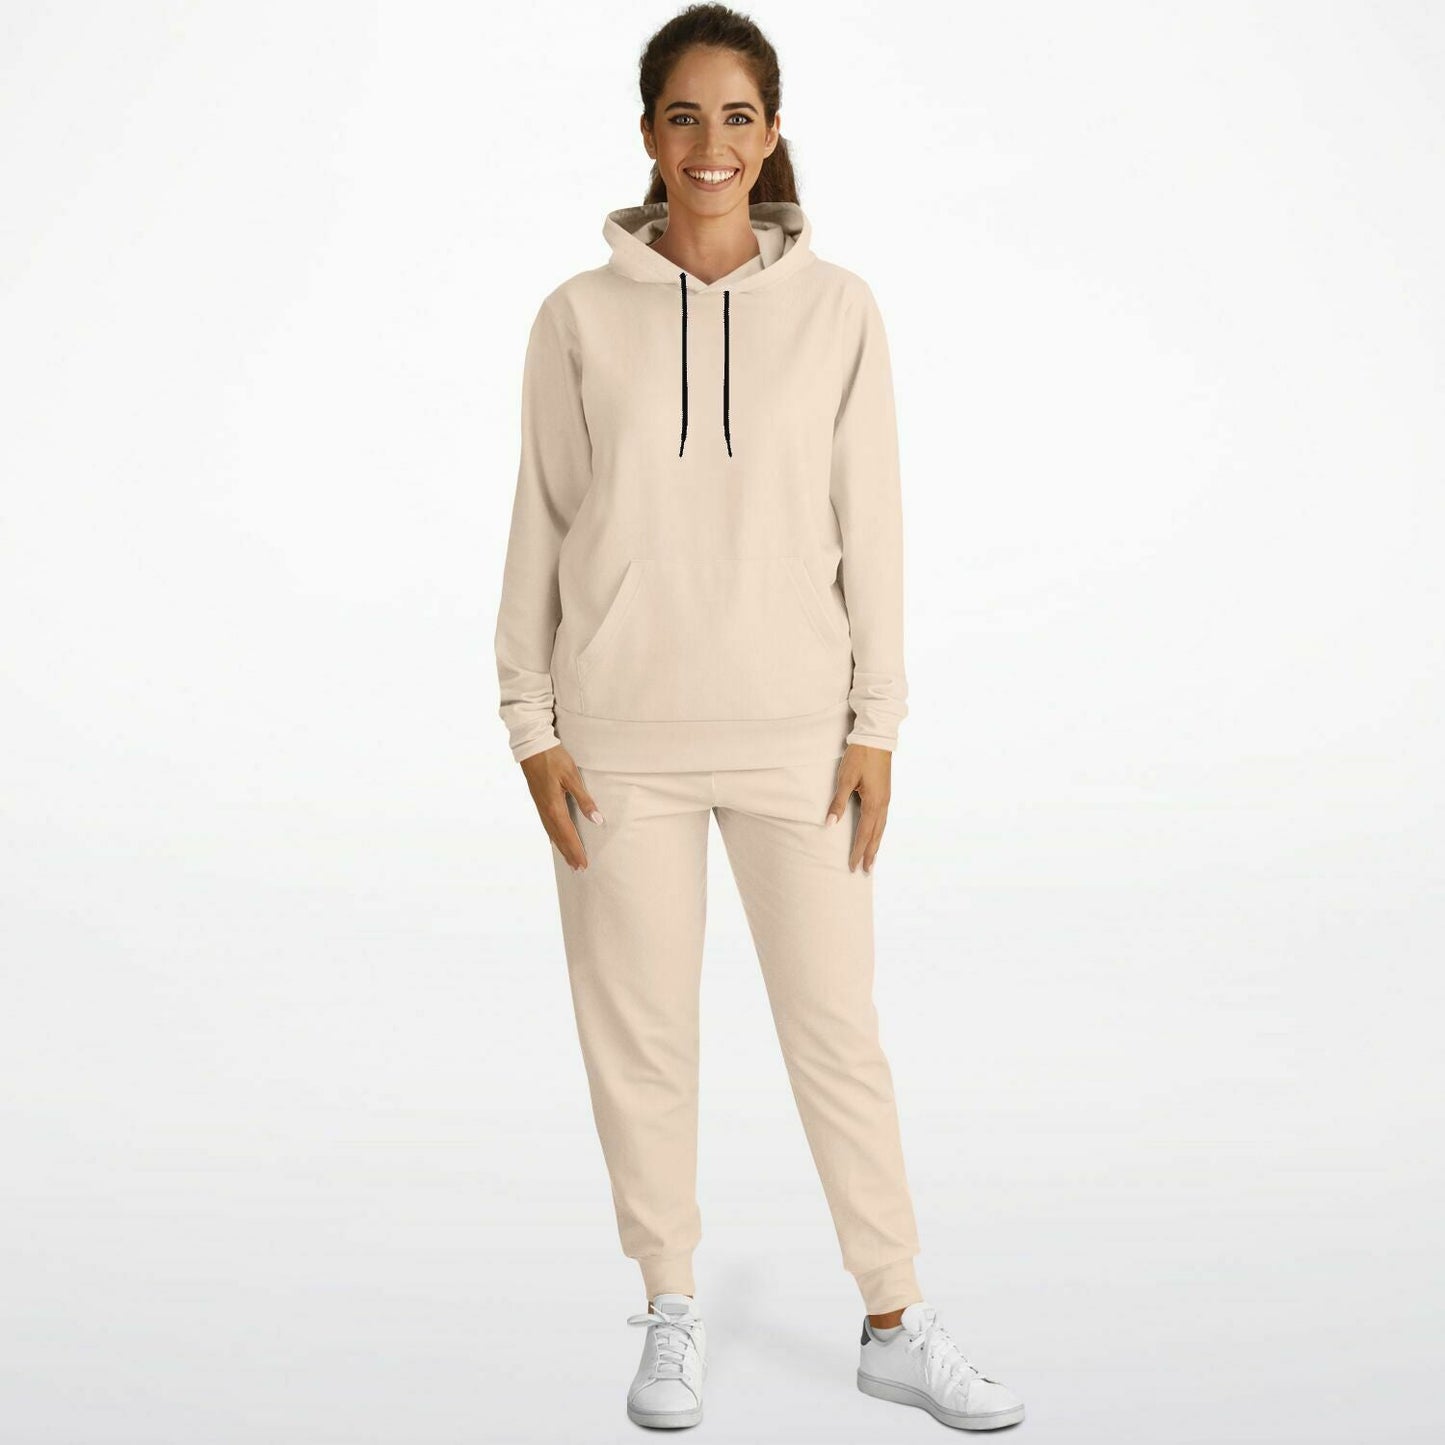 Pale Orange Women's Hoodie and Jogger Set - Sport Finesse